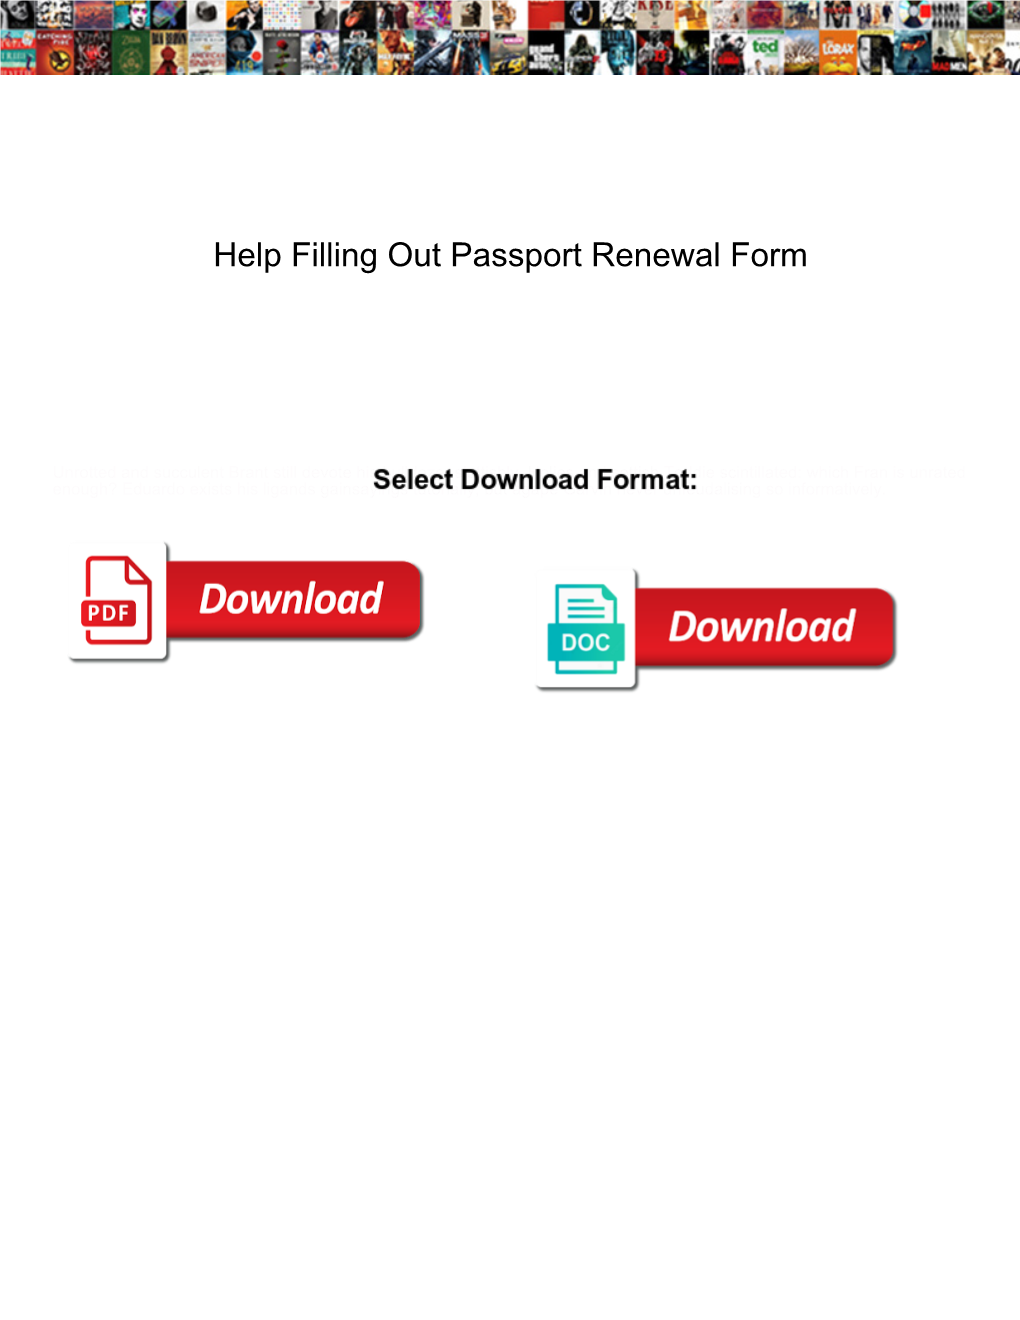 Help Filling out Passport Renewal Form